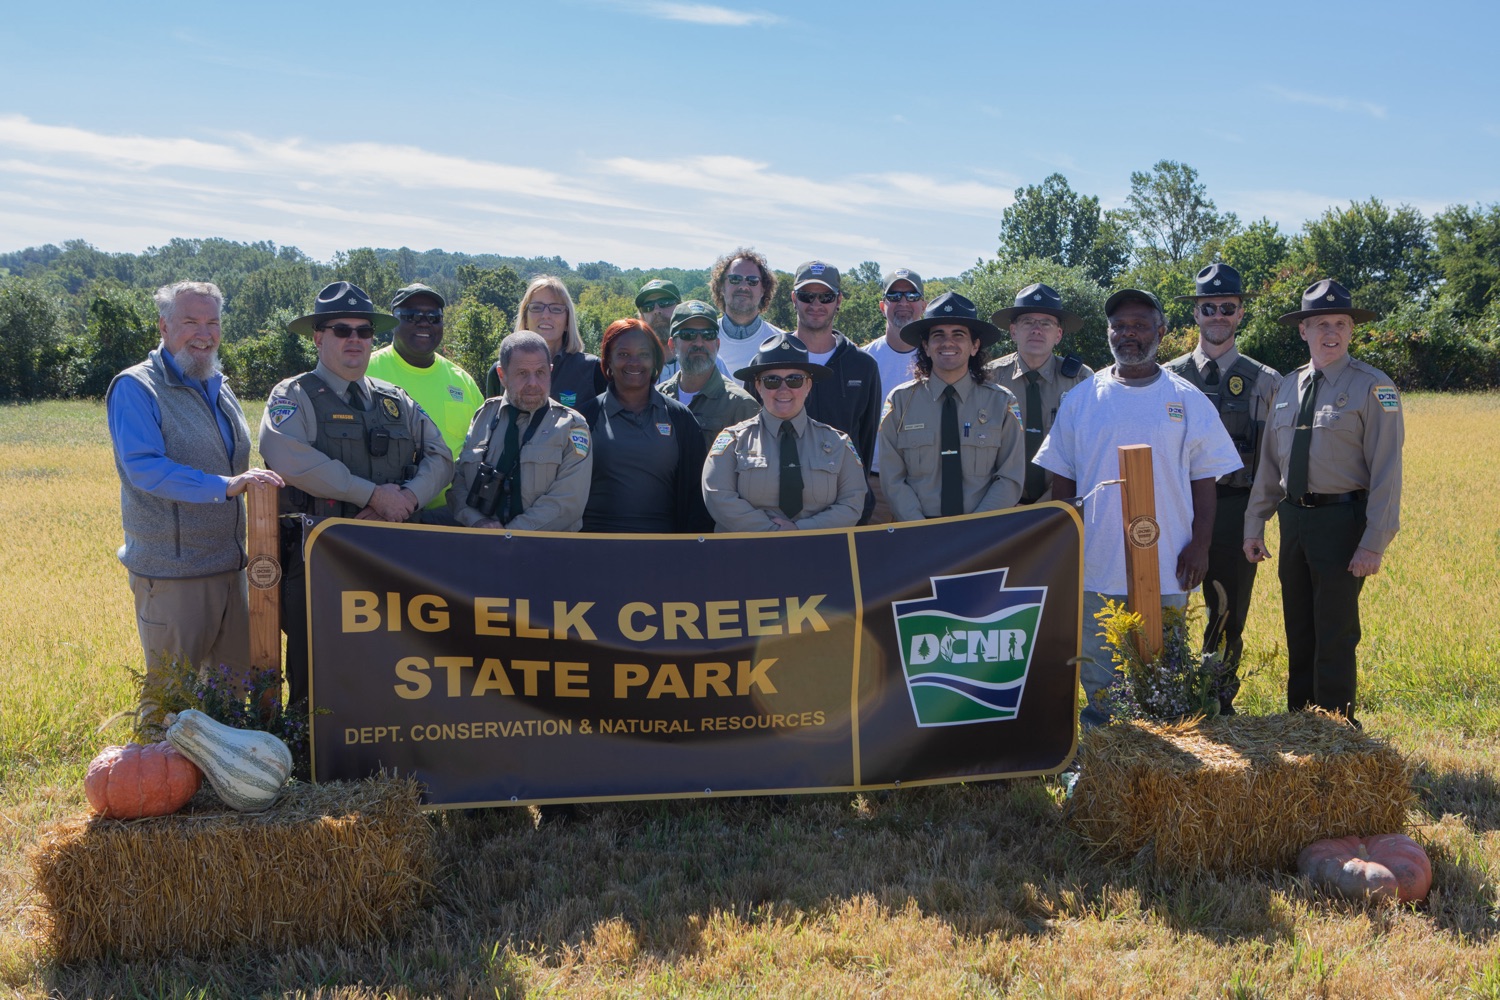 Department of Conservation and Natural Resources (DCNR) Secretary Cindy Adams Dunn joined a celebration at Big Elk Creek State Park in Chester County, one of three new state parks just added to the Pennsylvania system...We are proud to welcome Big Elk Creek into our wonderful network of state parks, said Dunn. The addition of this park in one of the fastest growing areas in Pennsylvania will provide healthy, safe access to the outdoors for generations to come. We are grateful to Governor Tom Wolf and the state legislature for prioritizing the health and wellness of Pennsylvanians in this region..<br><a href="https://filesource.amperwave.net/commonwealthofpa/photo/22226_DCNR_ChesterCounty_ERD_30.jpg" target="_blank">⇣ Download Photo</a>